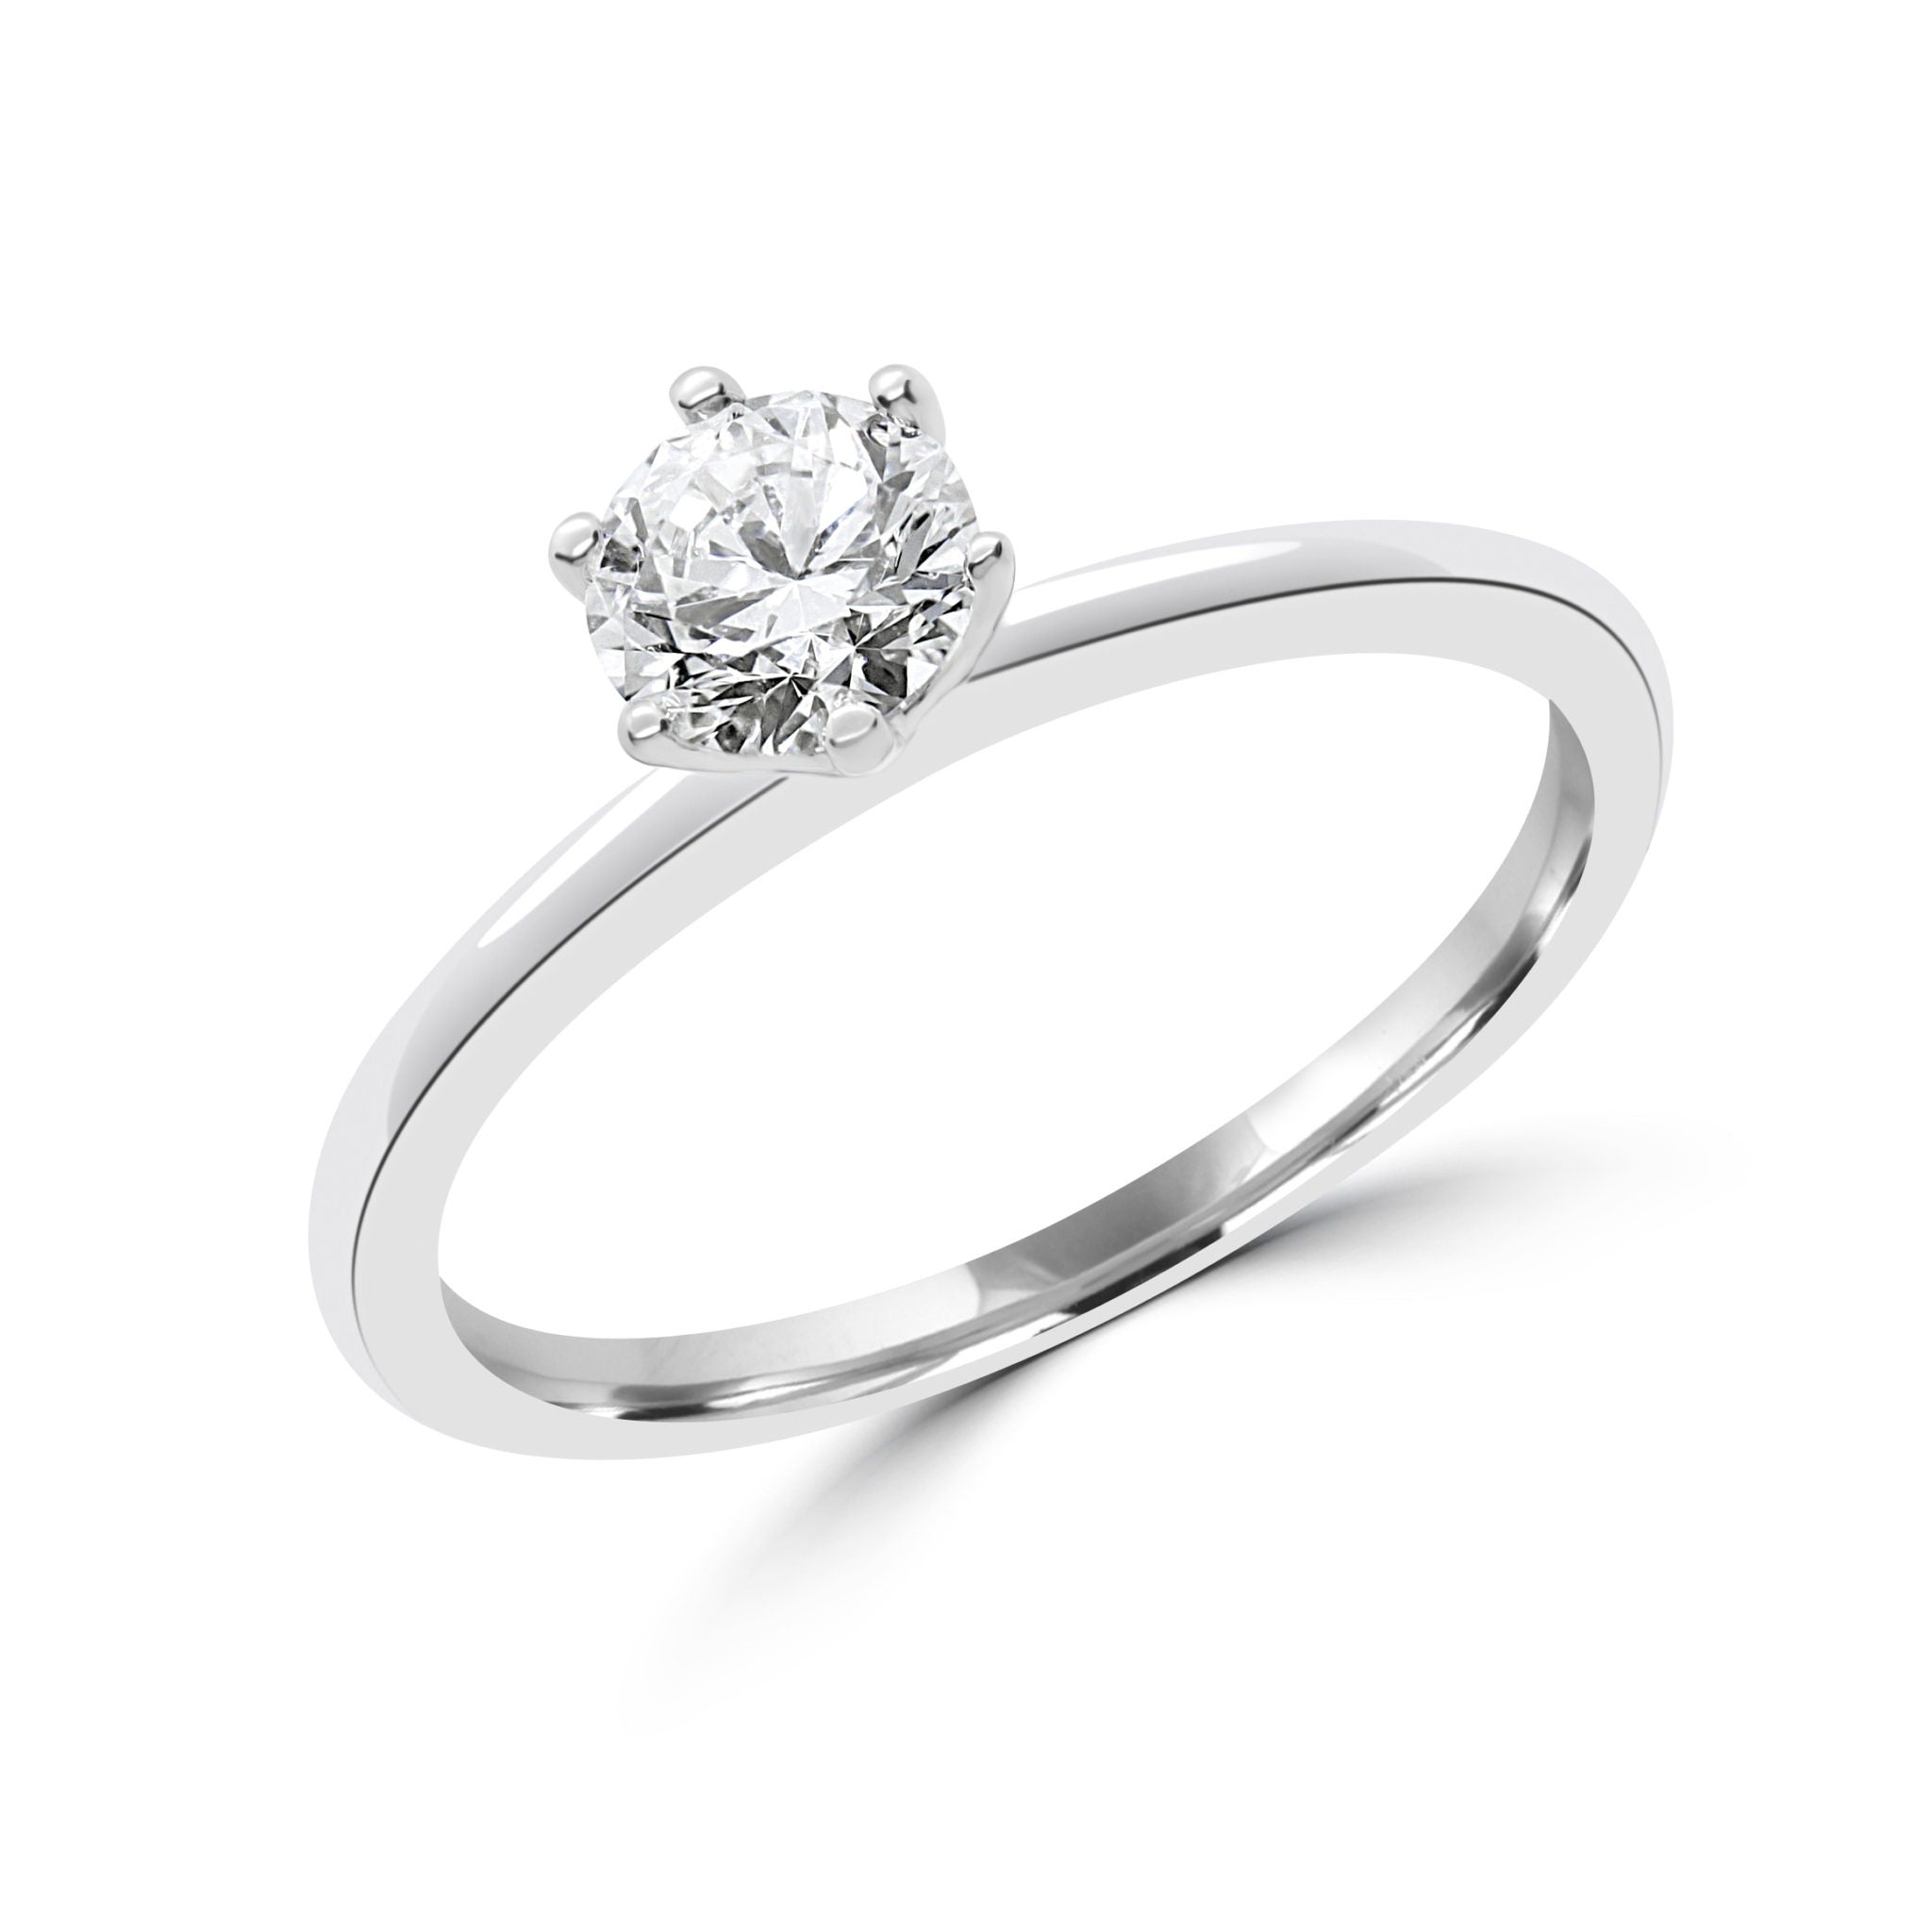 Gallery solitaire engagement ring 0.50 (ctw)14k white gold